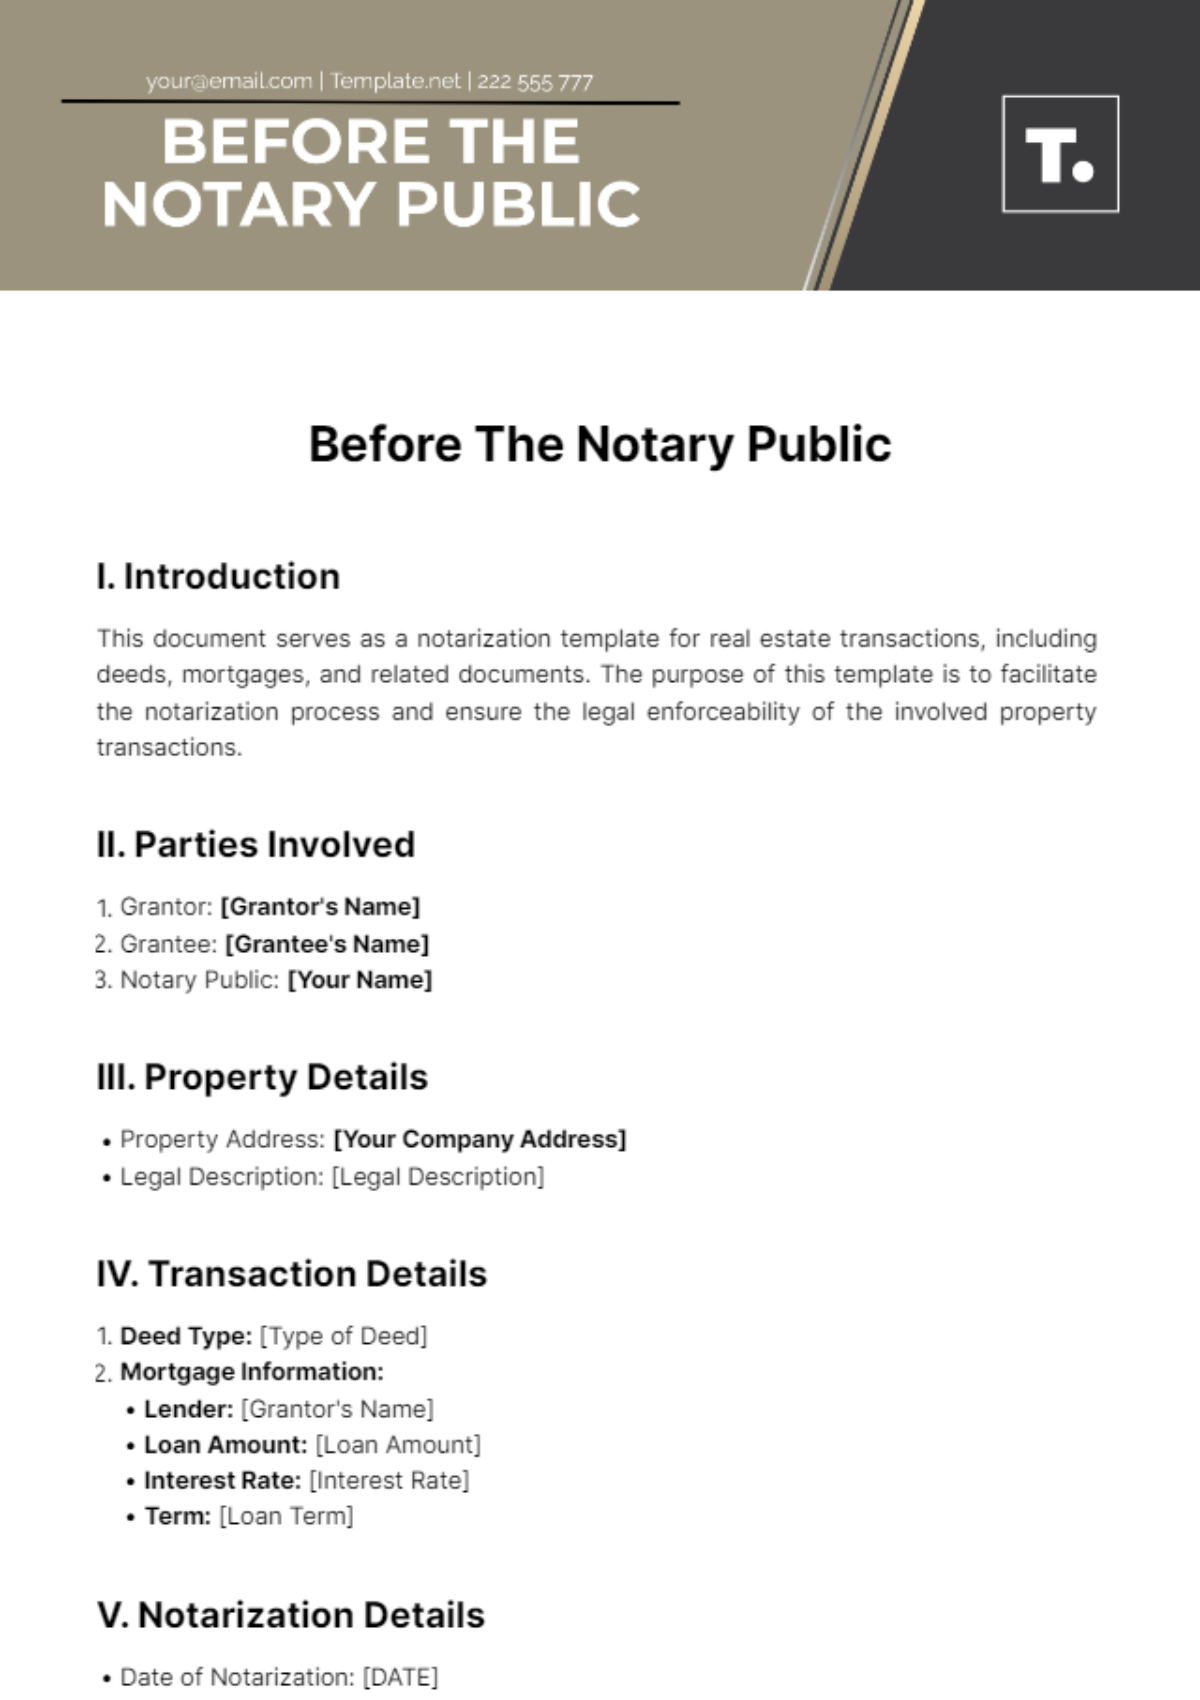 Free Before The Notary Public Template